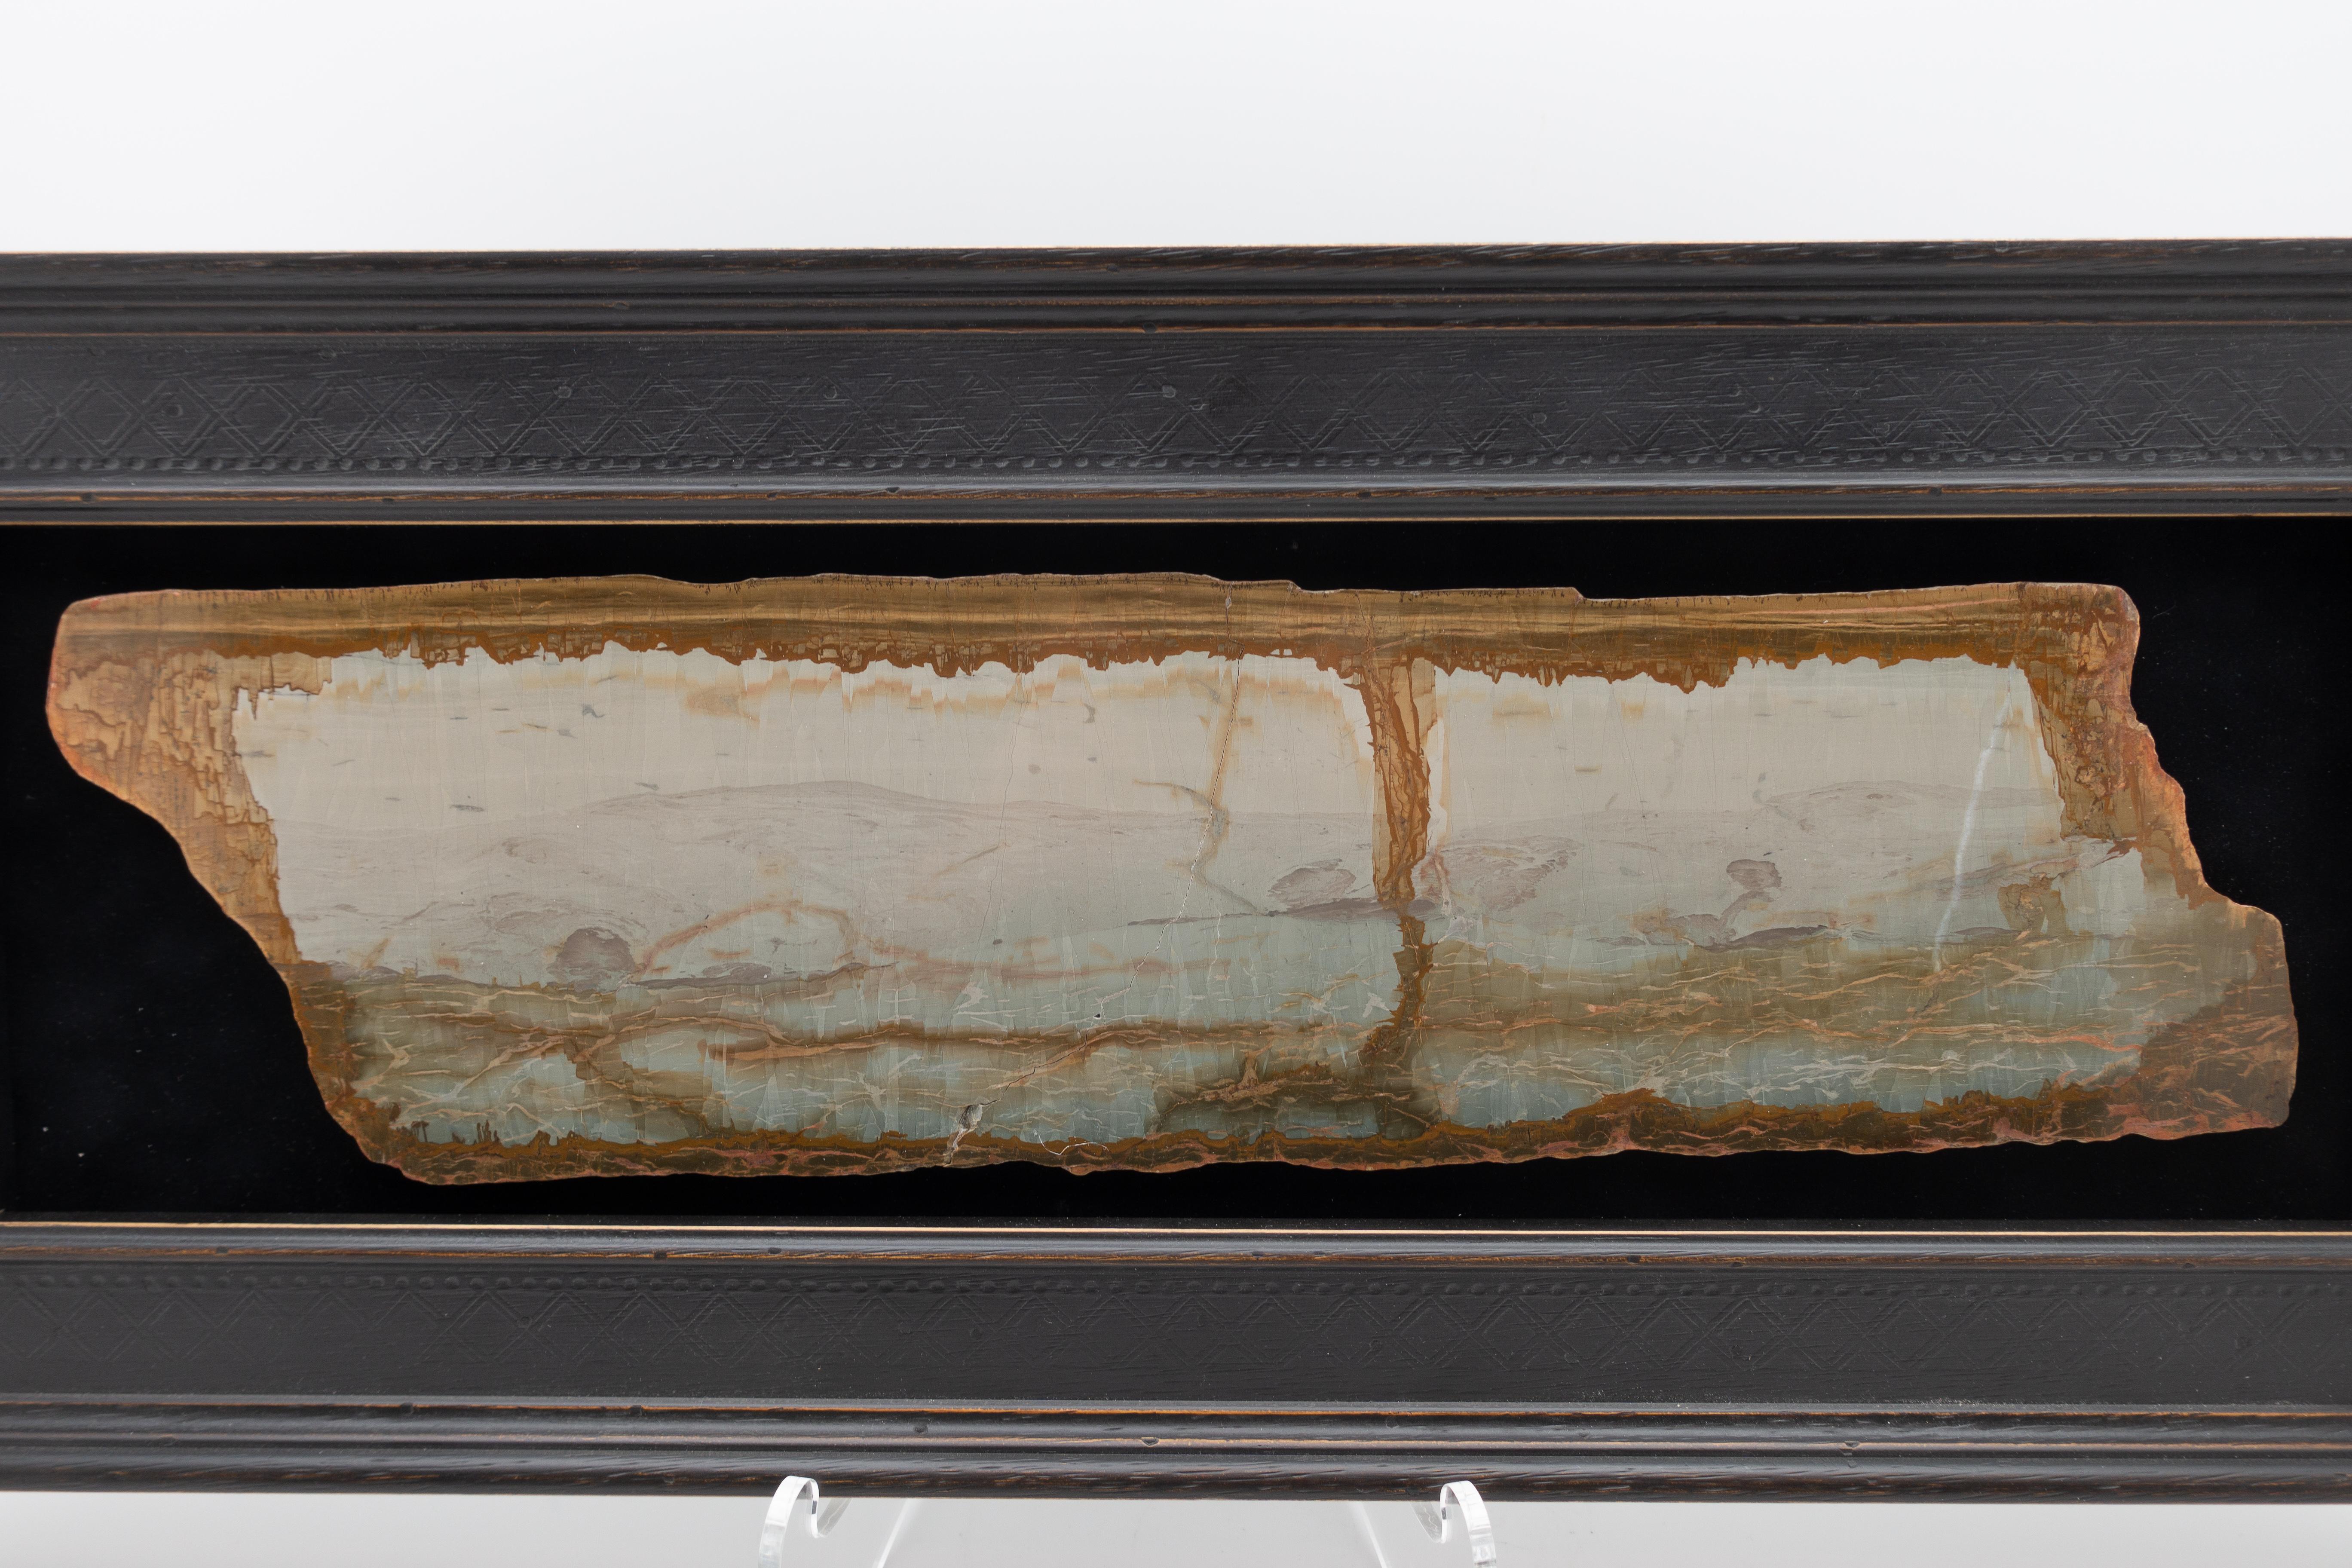 Framed slice of pietra paesina, also known as landscape stone or ruin marble. Pietra paesina is a kind of limestone or marble originating mostly from Florence territory, whose natural appearance gives the impression of a ruined landscape painting.